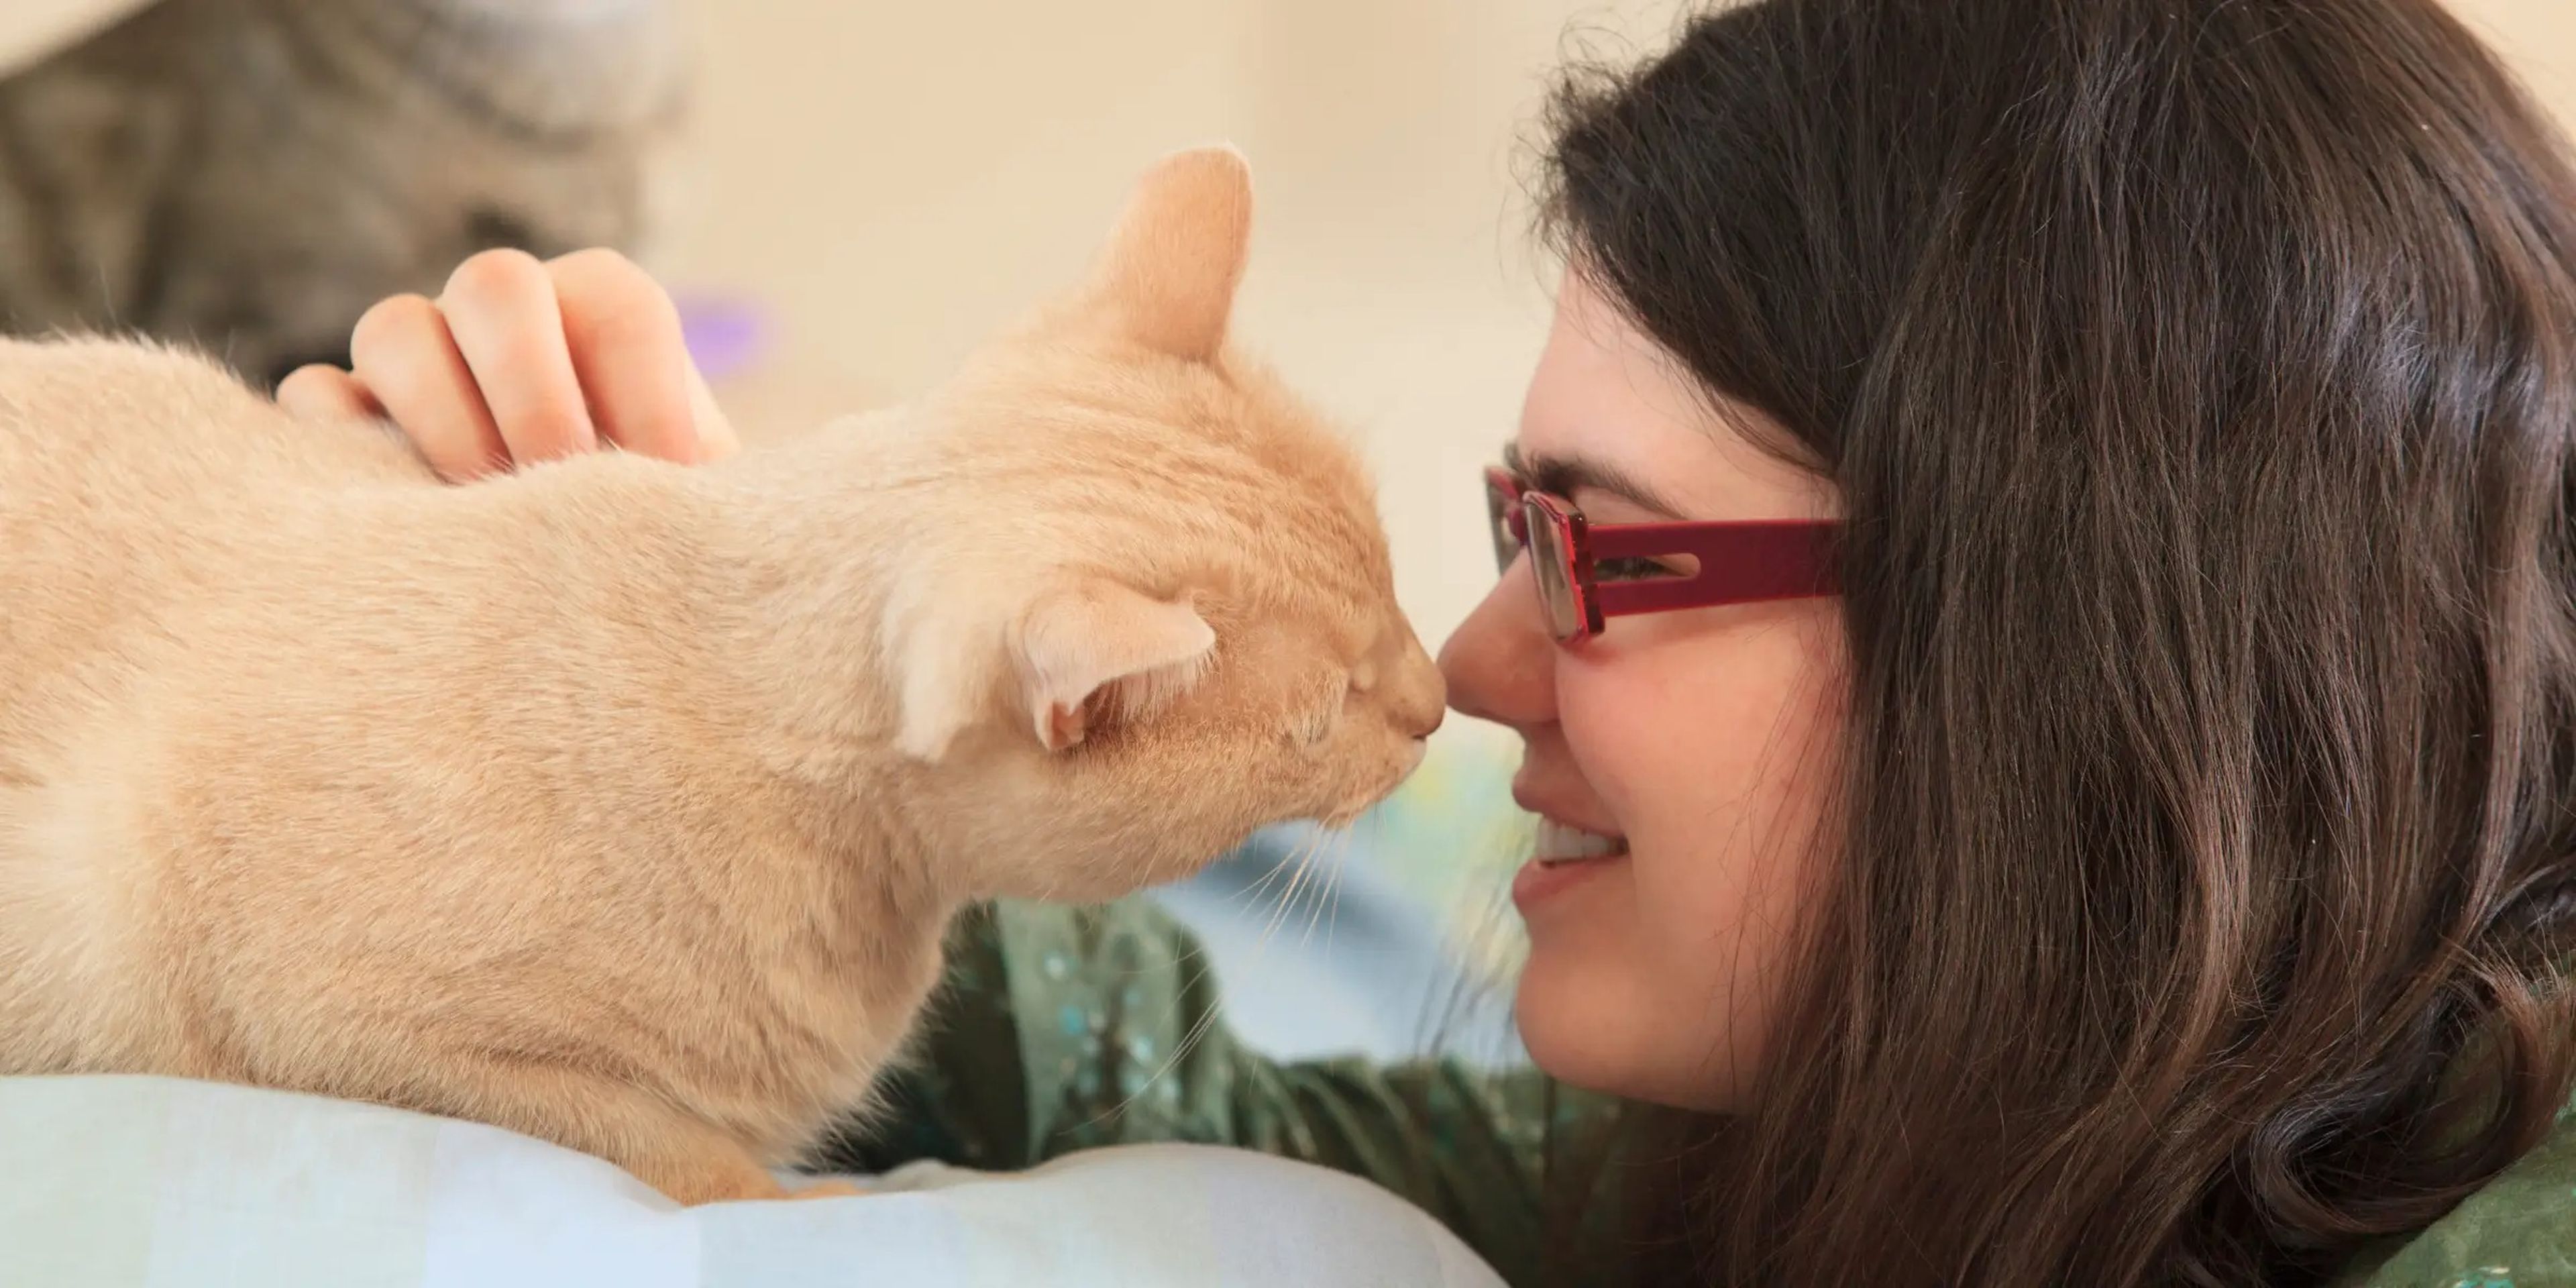 A person rubbing their nose against a cat’s nose.